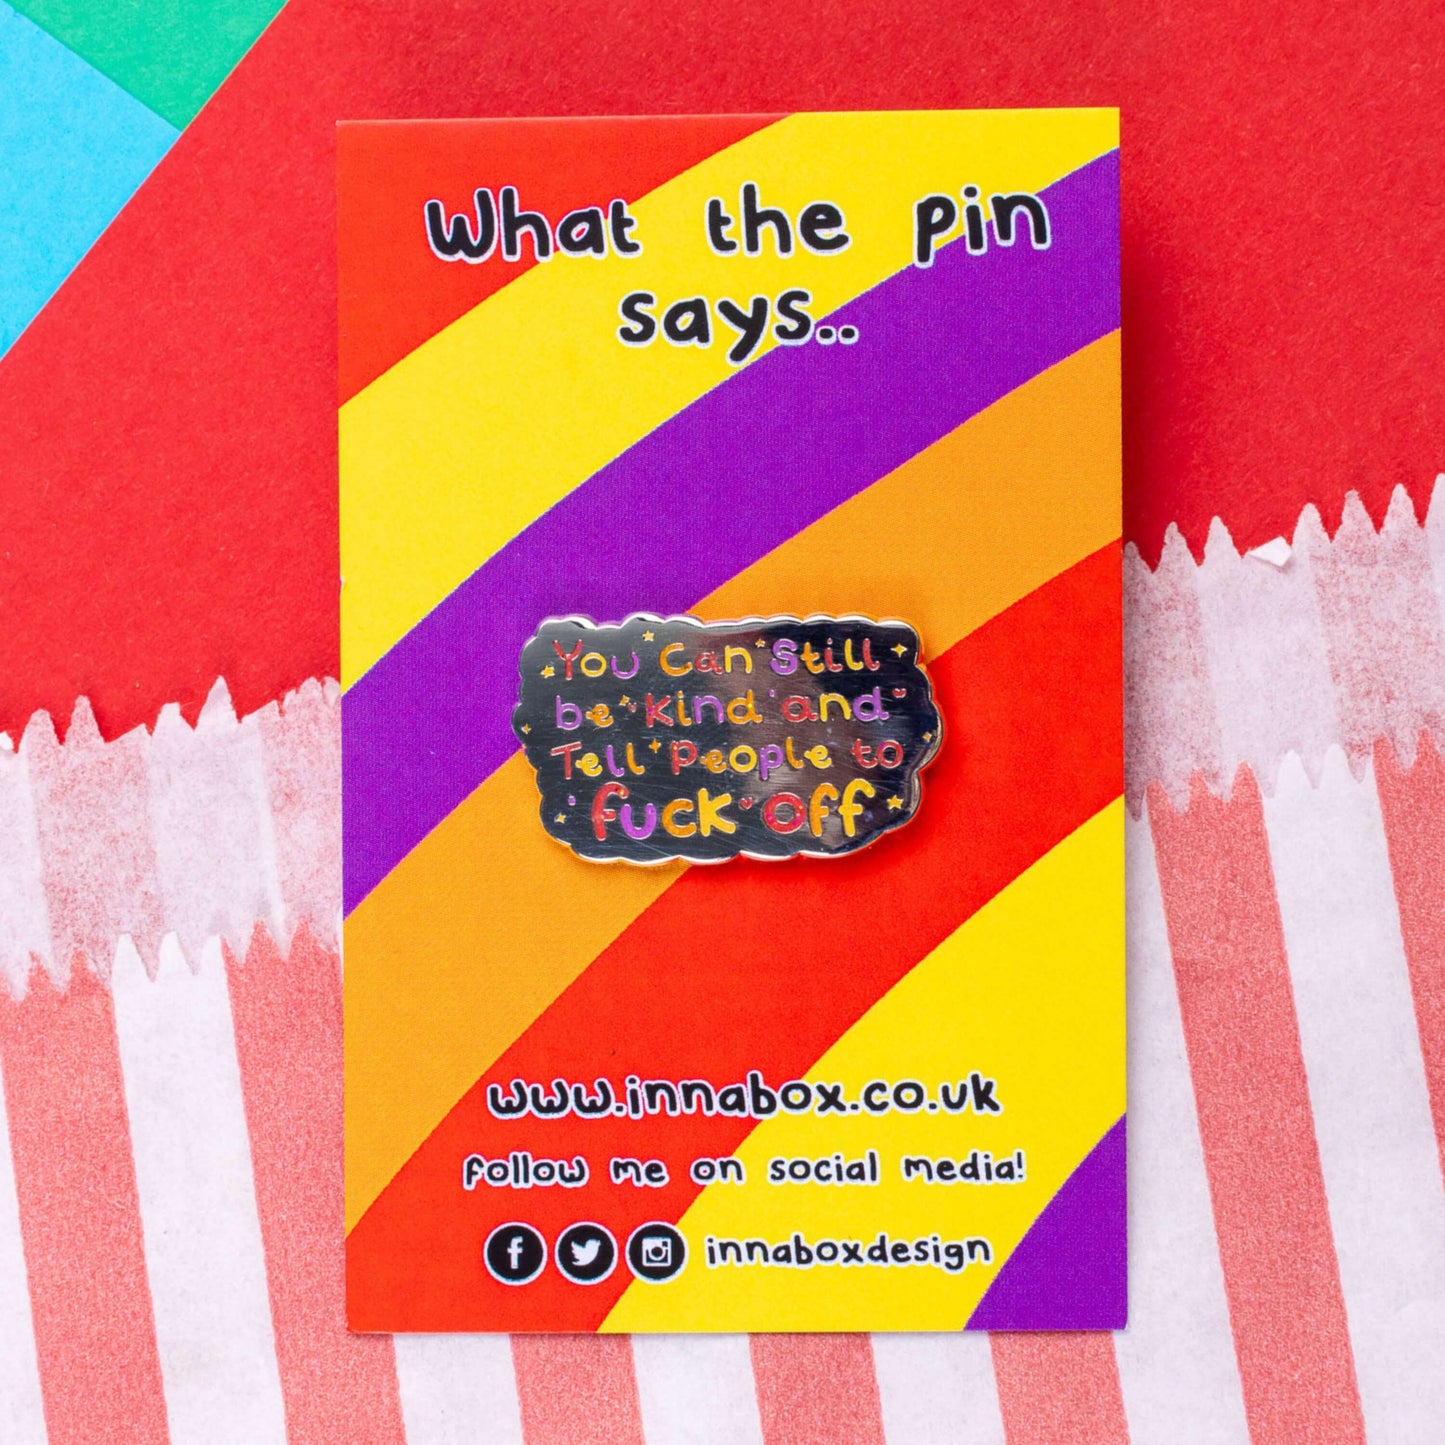 The You Can Still be Kind and Tell People to F**k Off Enamel Pin on red, yellow, purple and orange stripe backing card with top text reading 'what the pin says..' laid on a red, blue and green card background. The shiny silver enamel pin has rainbow writing reading 'you can still be kind and tell people to fuck off' with multicoloured sparkles, dots and stars.